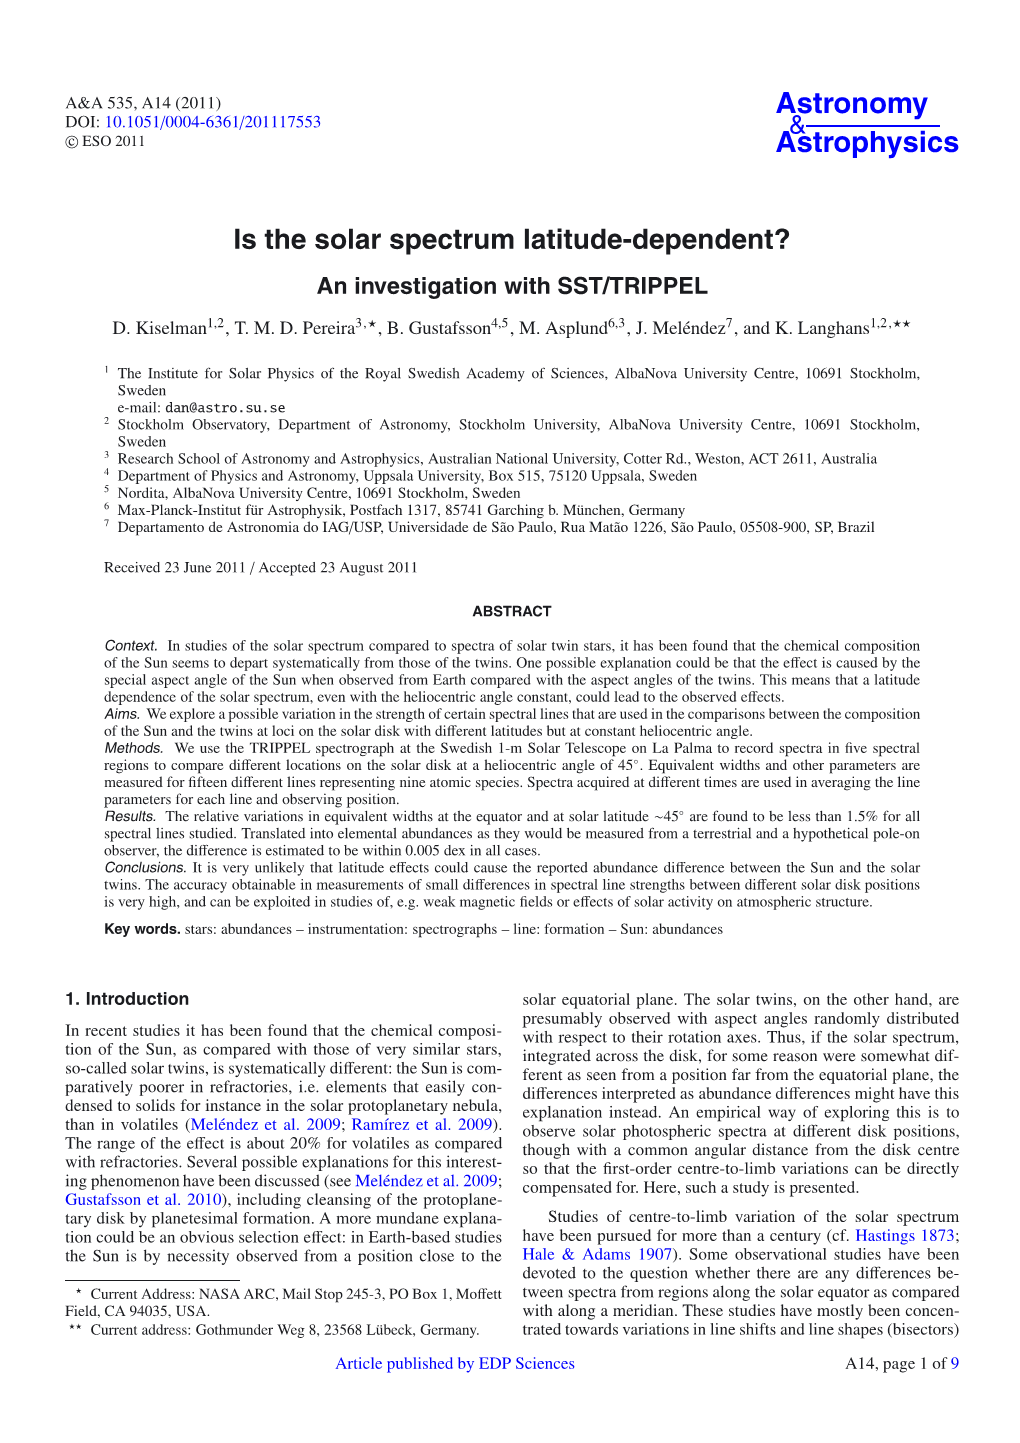 Is the Solar Spectrum Latitude-Dependent? an Investigation with SST/TRIPPEL